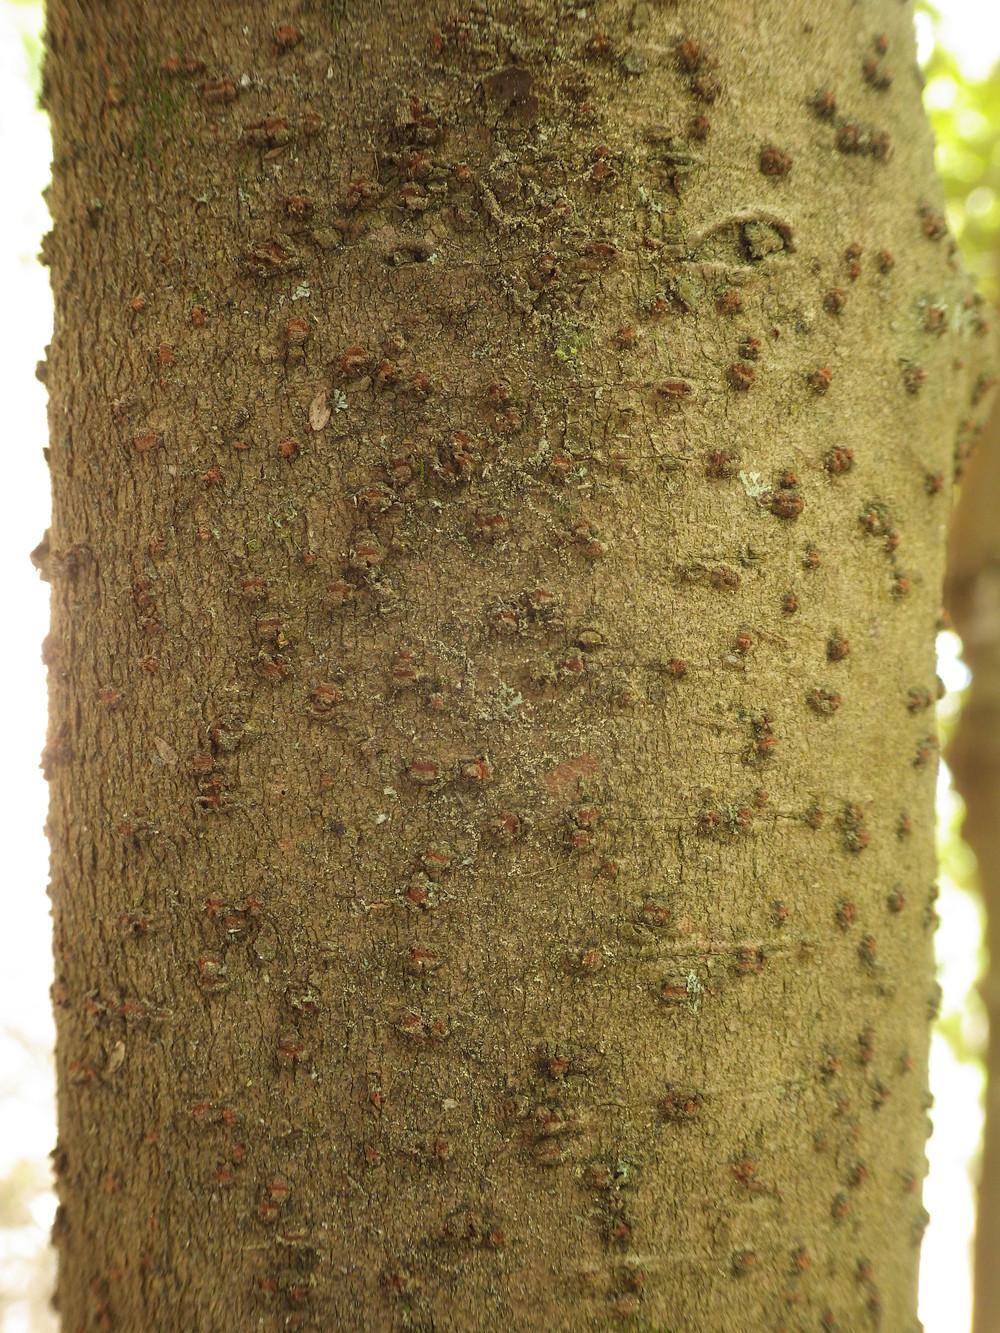 In woody plants the epidermis is replaced by bark or cork, so gas